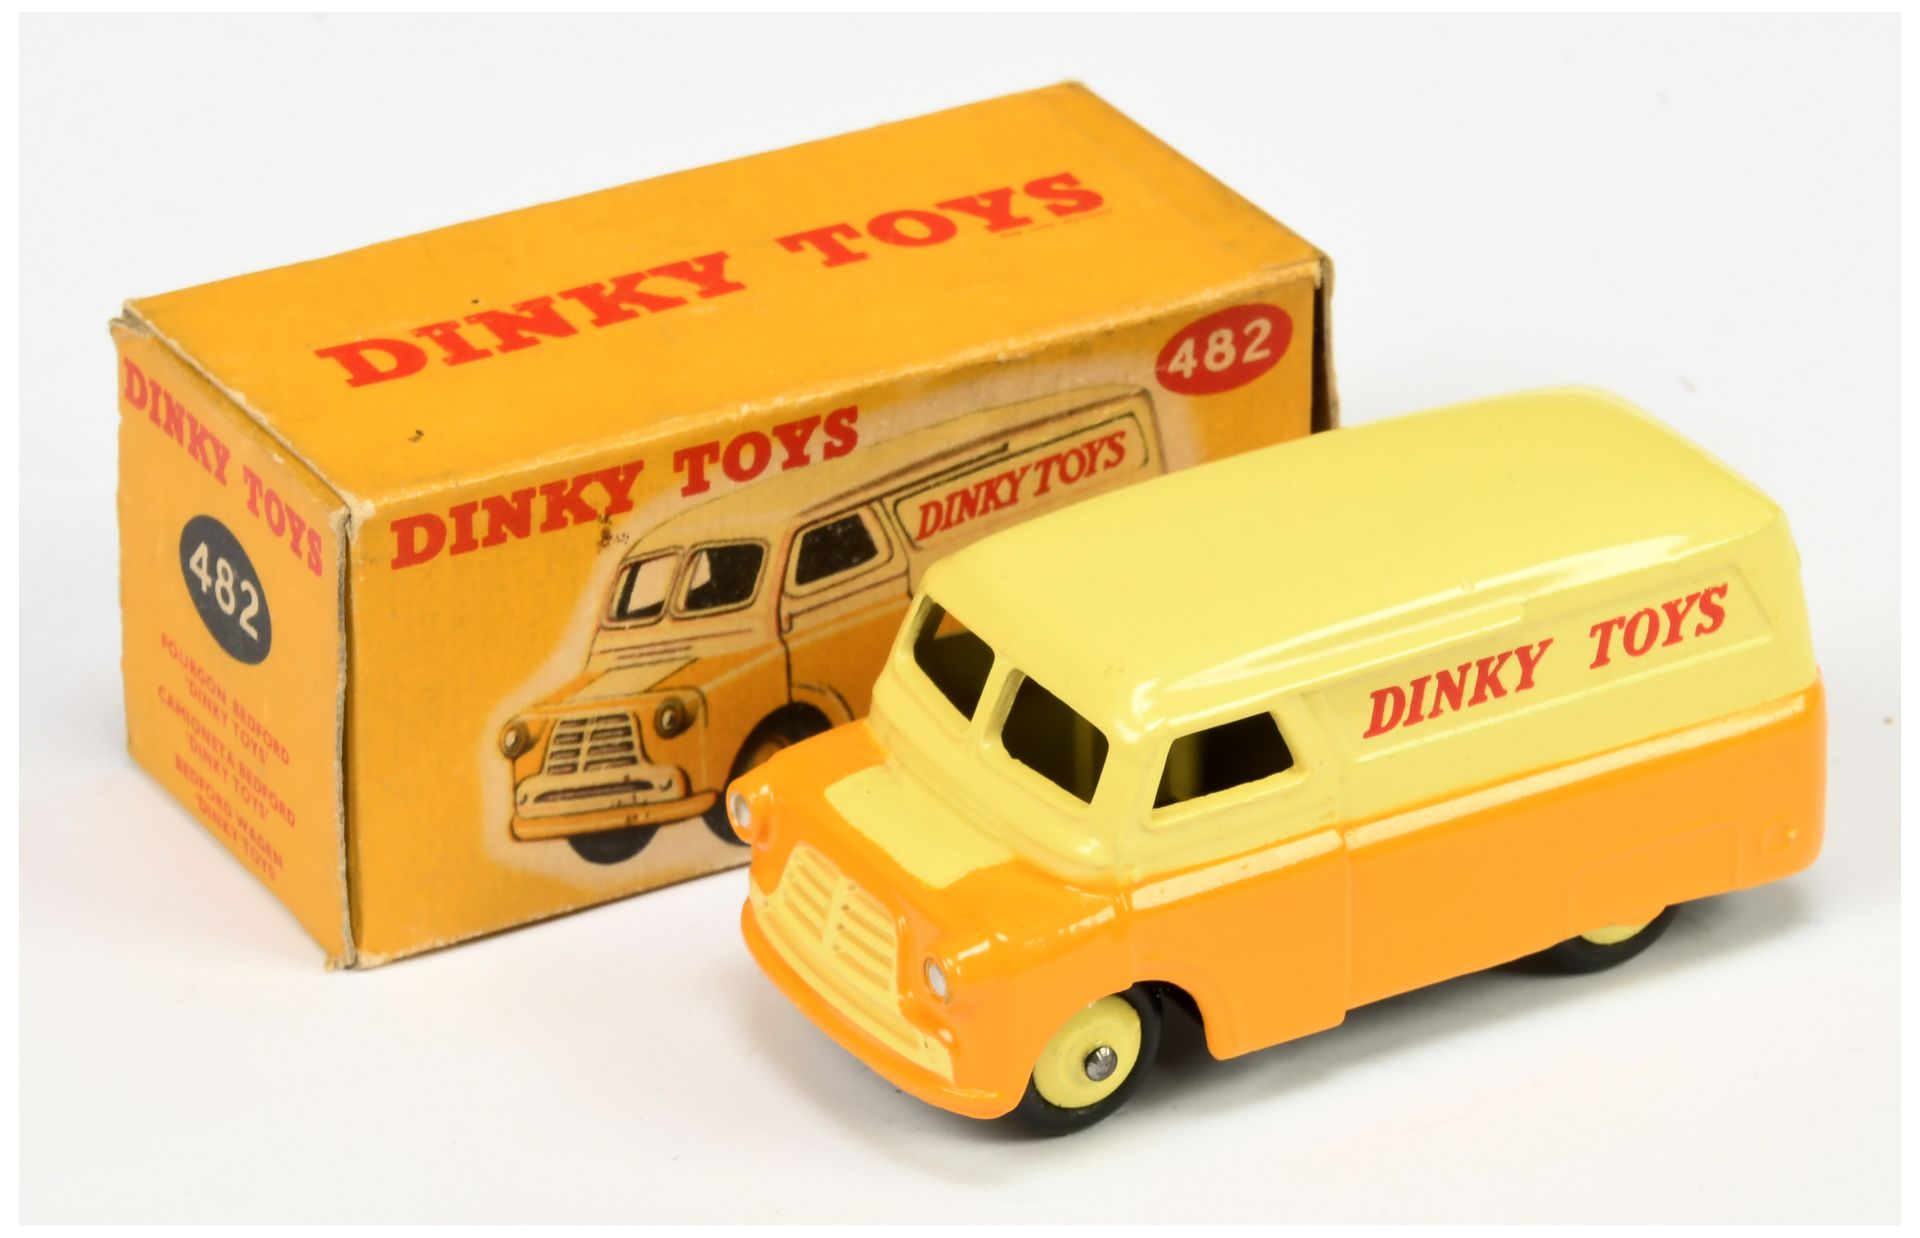 Dinky Toys 480 Bedford "Dinky Toys" Van - Two-Tone Yellow with rigid hubs and silver trim